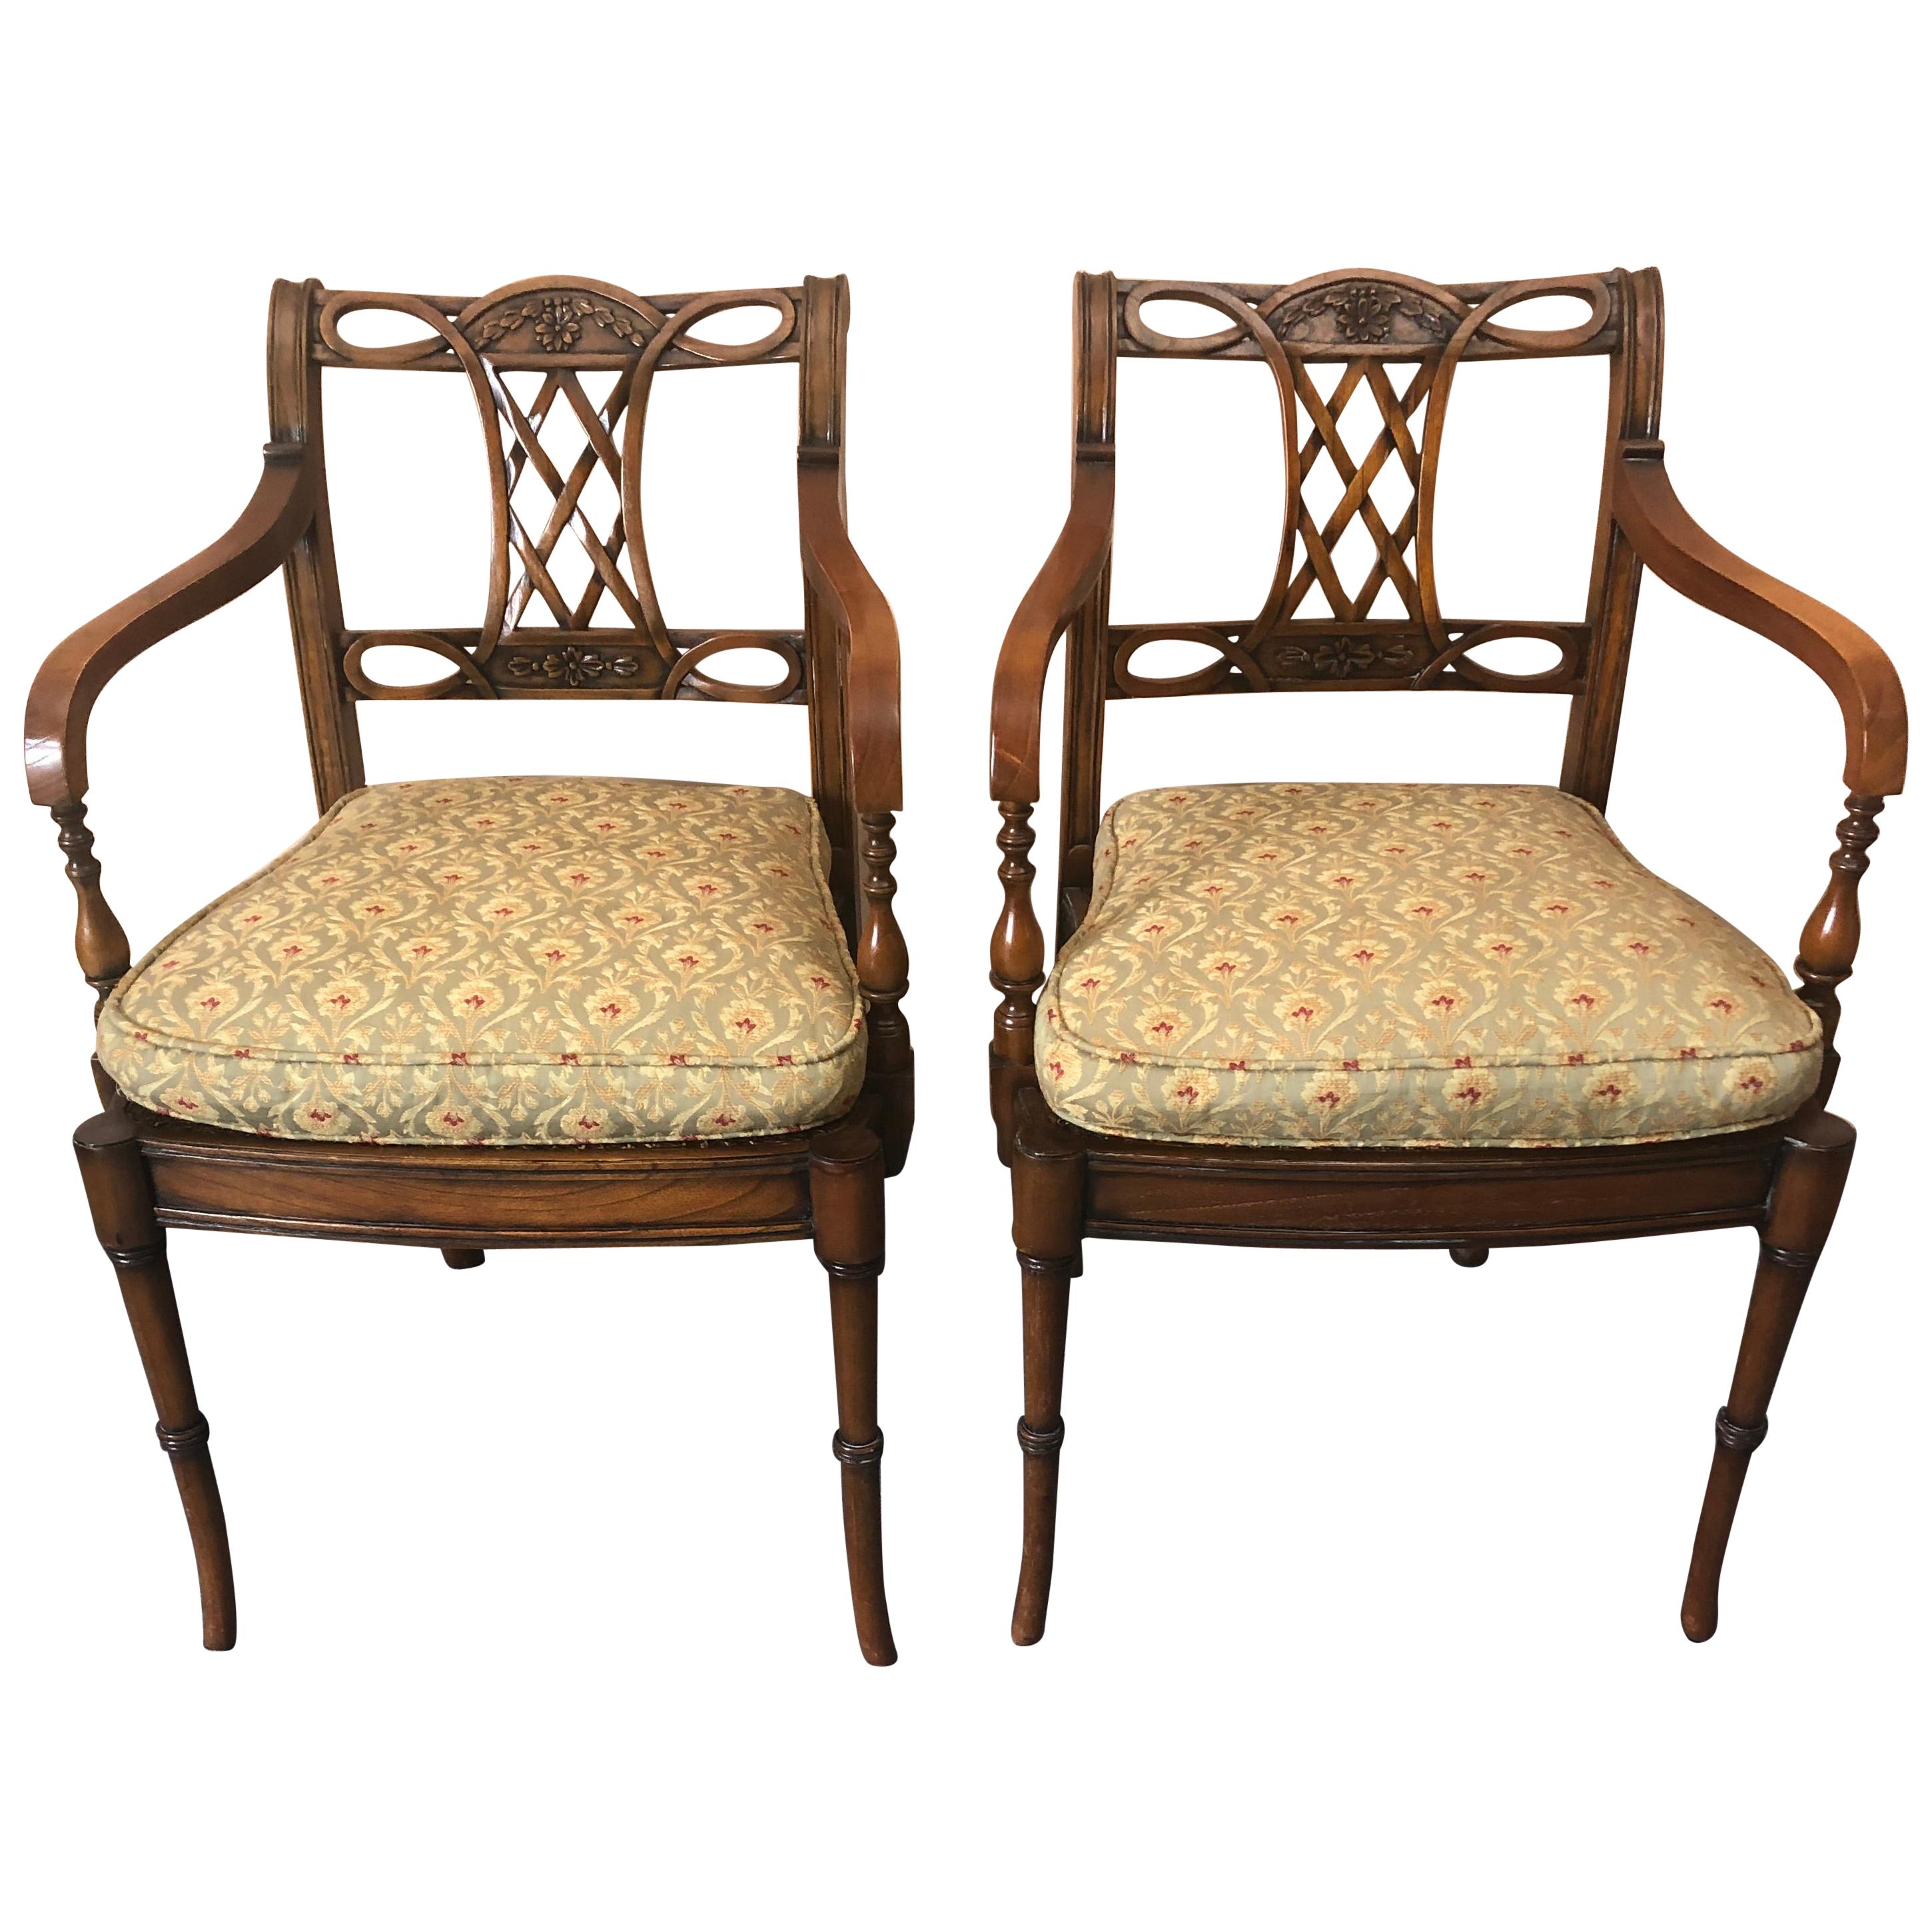 Refined Pair of Maitland Smith Mahogany Armchairs with Caned Seats 